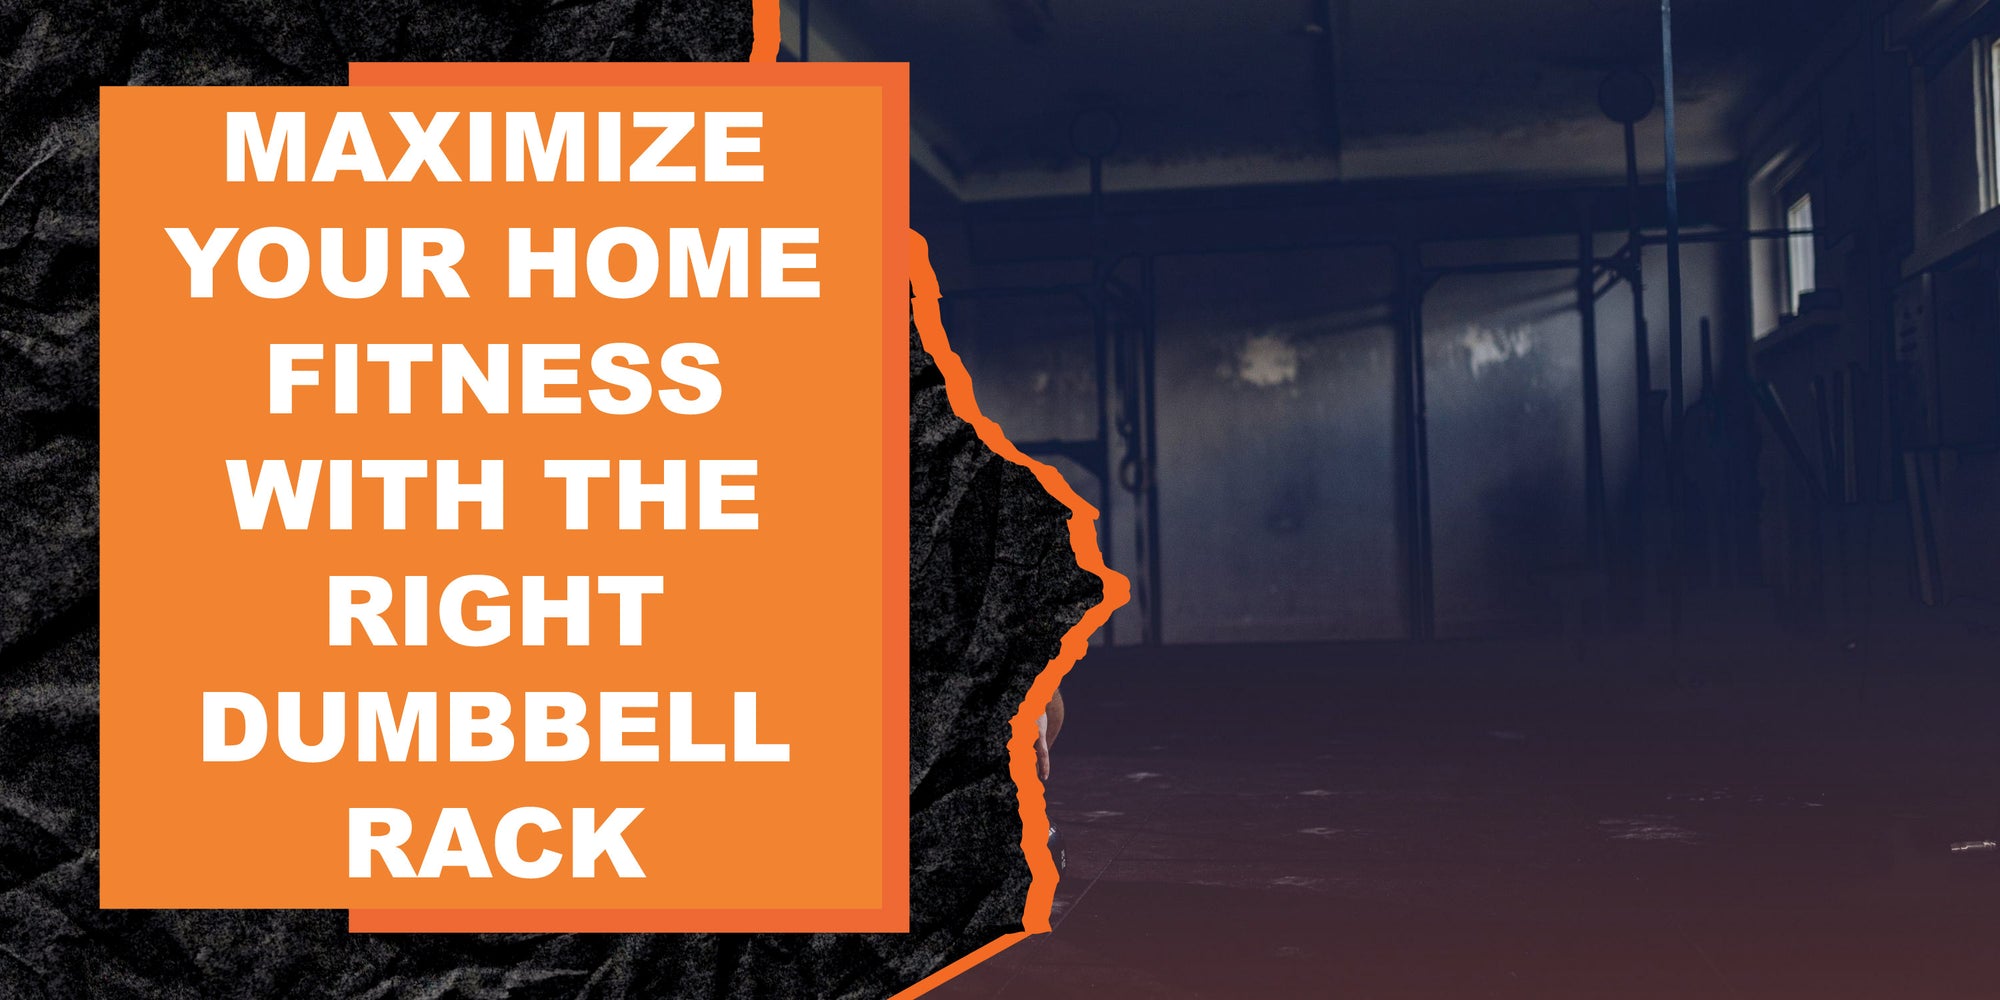 Maximize Your Home Fitness with the Right Dumbbell Rack